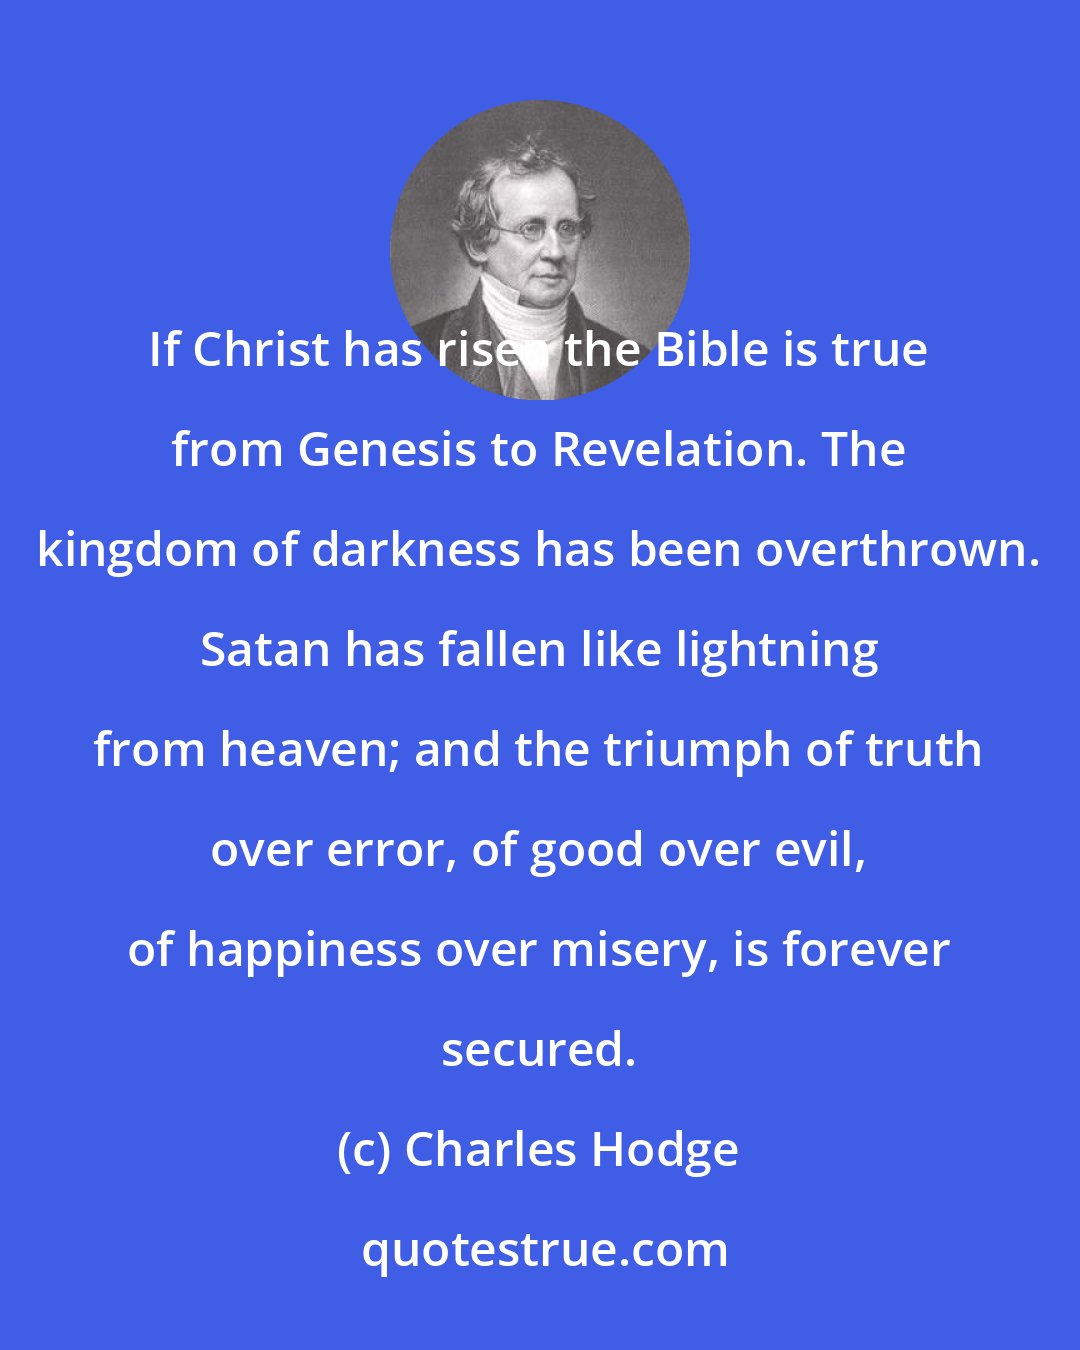 Charles Hodge: If Christ has risen the Bible is true from Genesis to Revelation. The kingdom of darkness has been overthrown. Satan has fallen like lightning from heaven; and the triumph of truth over error, of good over evil, of happiness over misery, is forever secured.